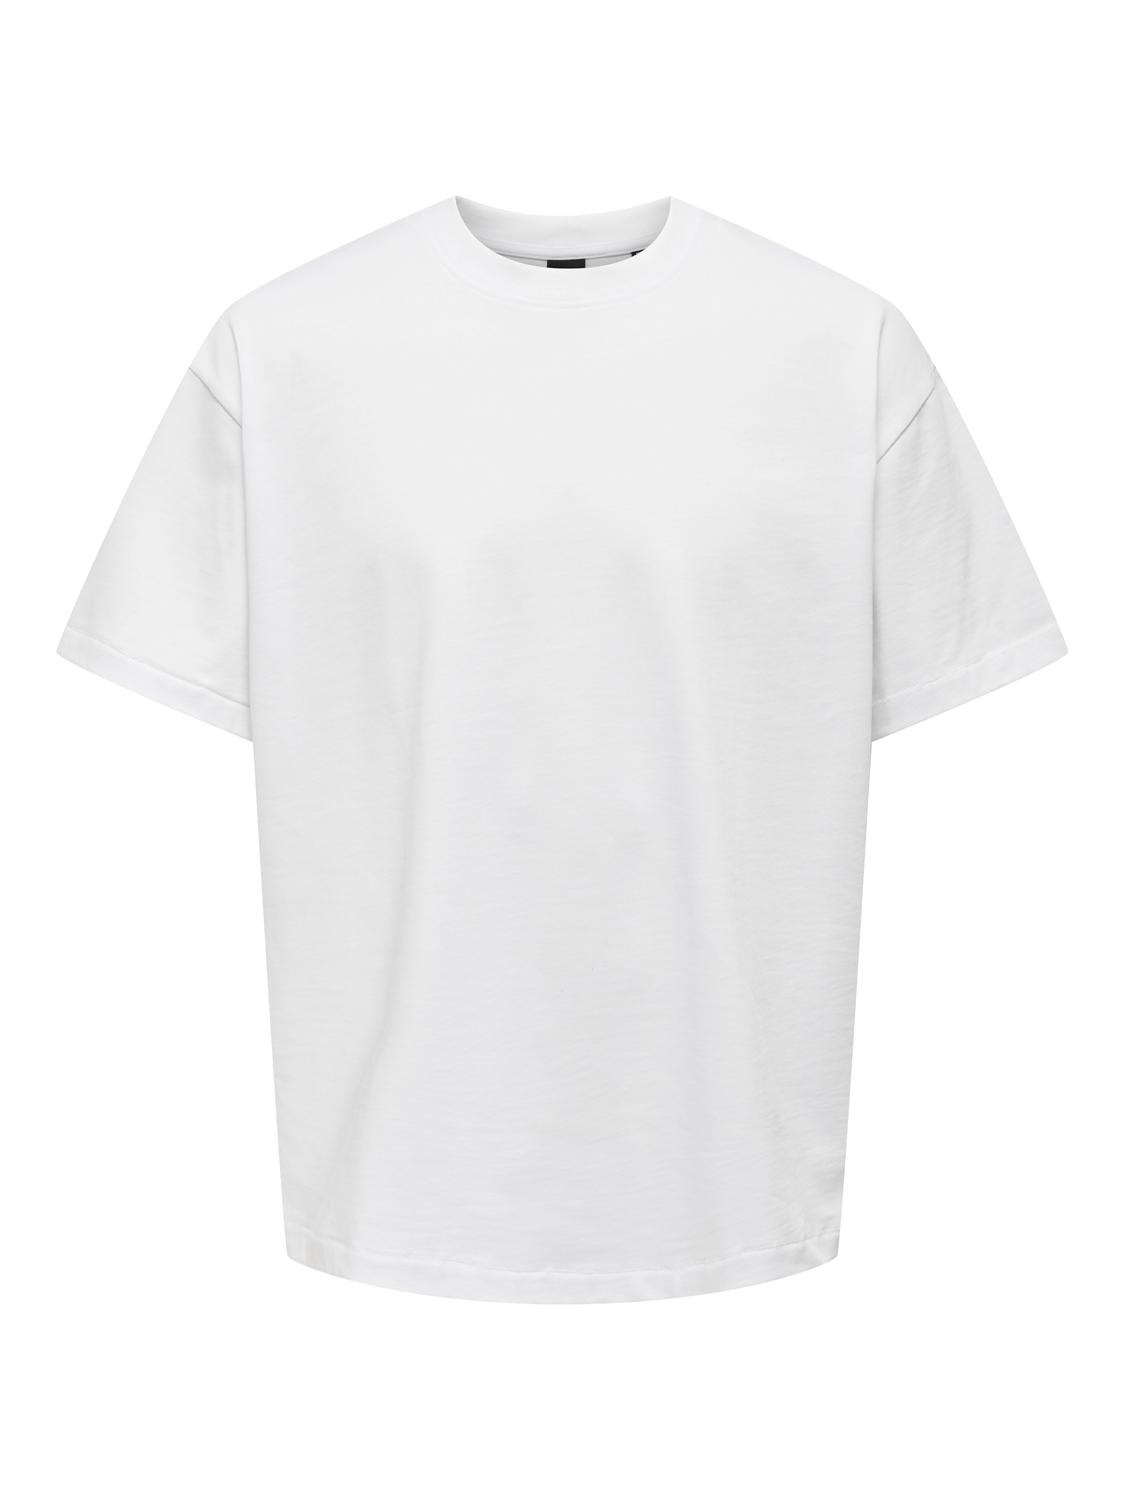 ONLY & SONS Oversized fit O-hals T-shirts -Bright White - 22027787